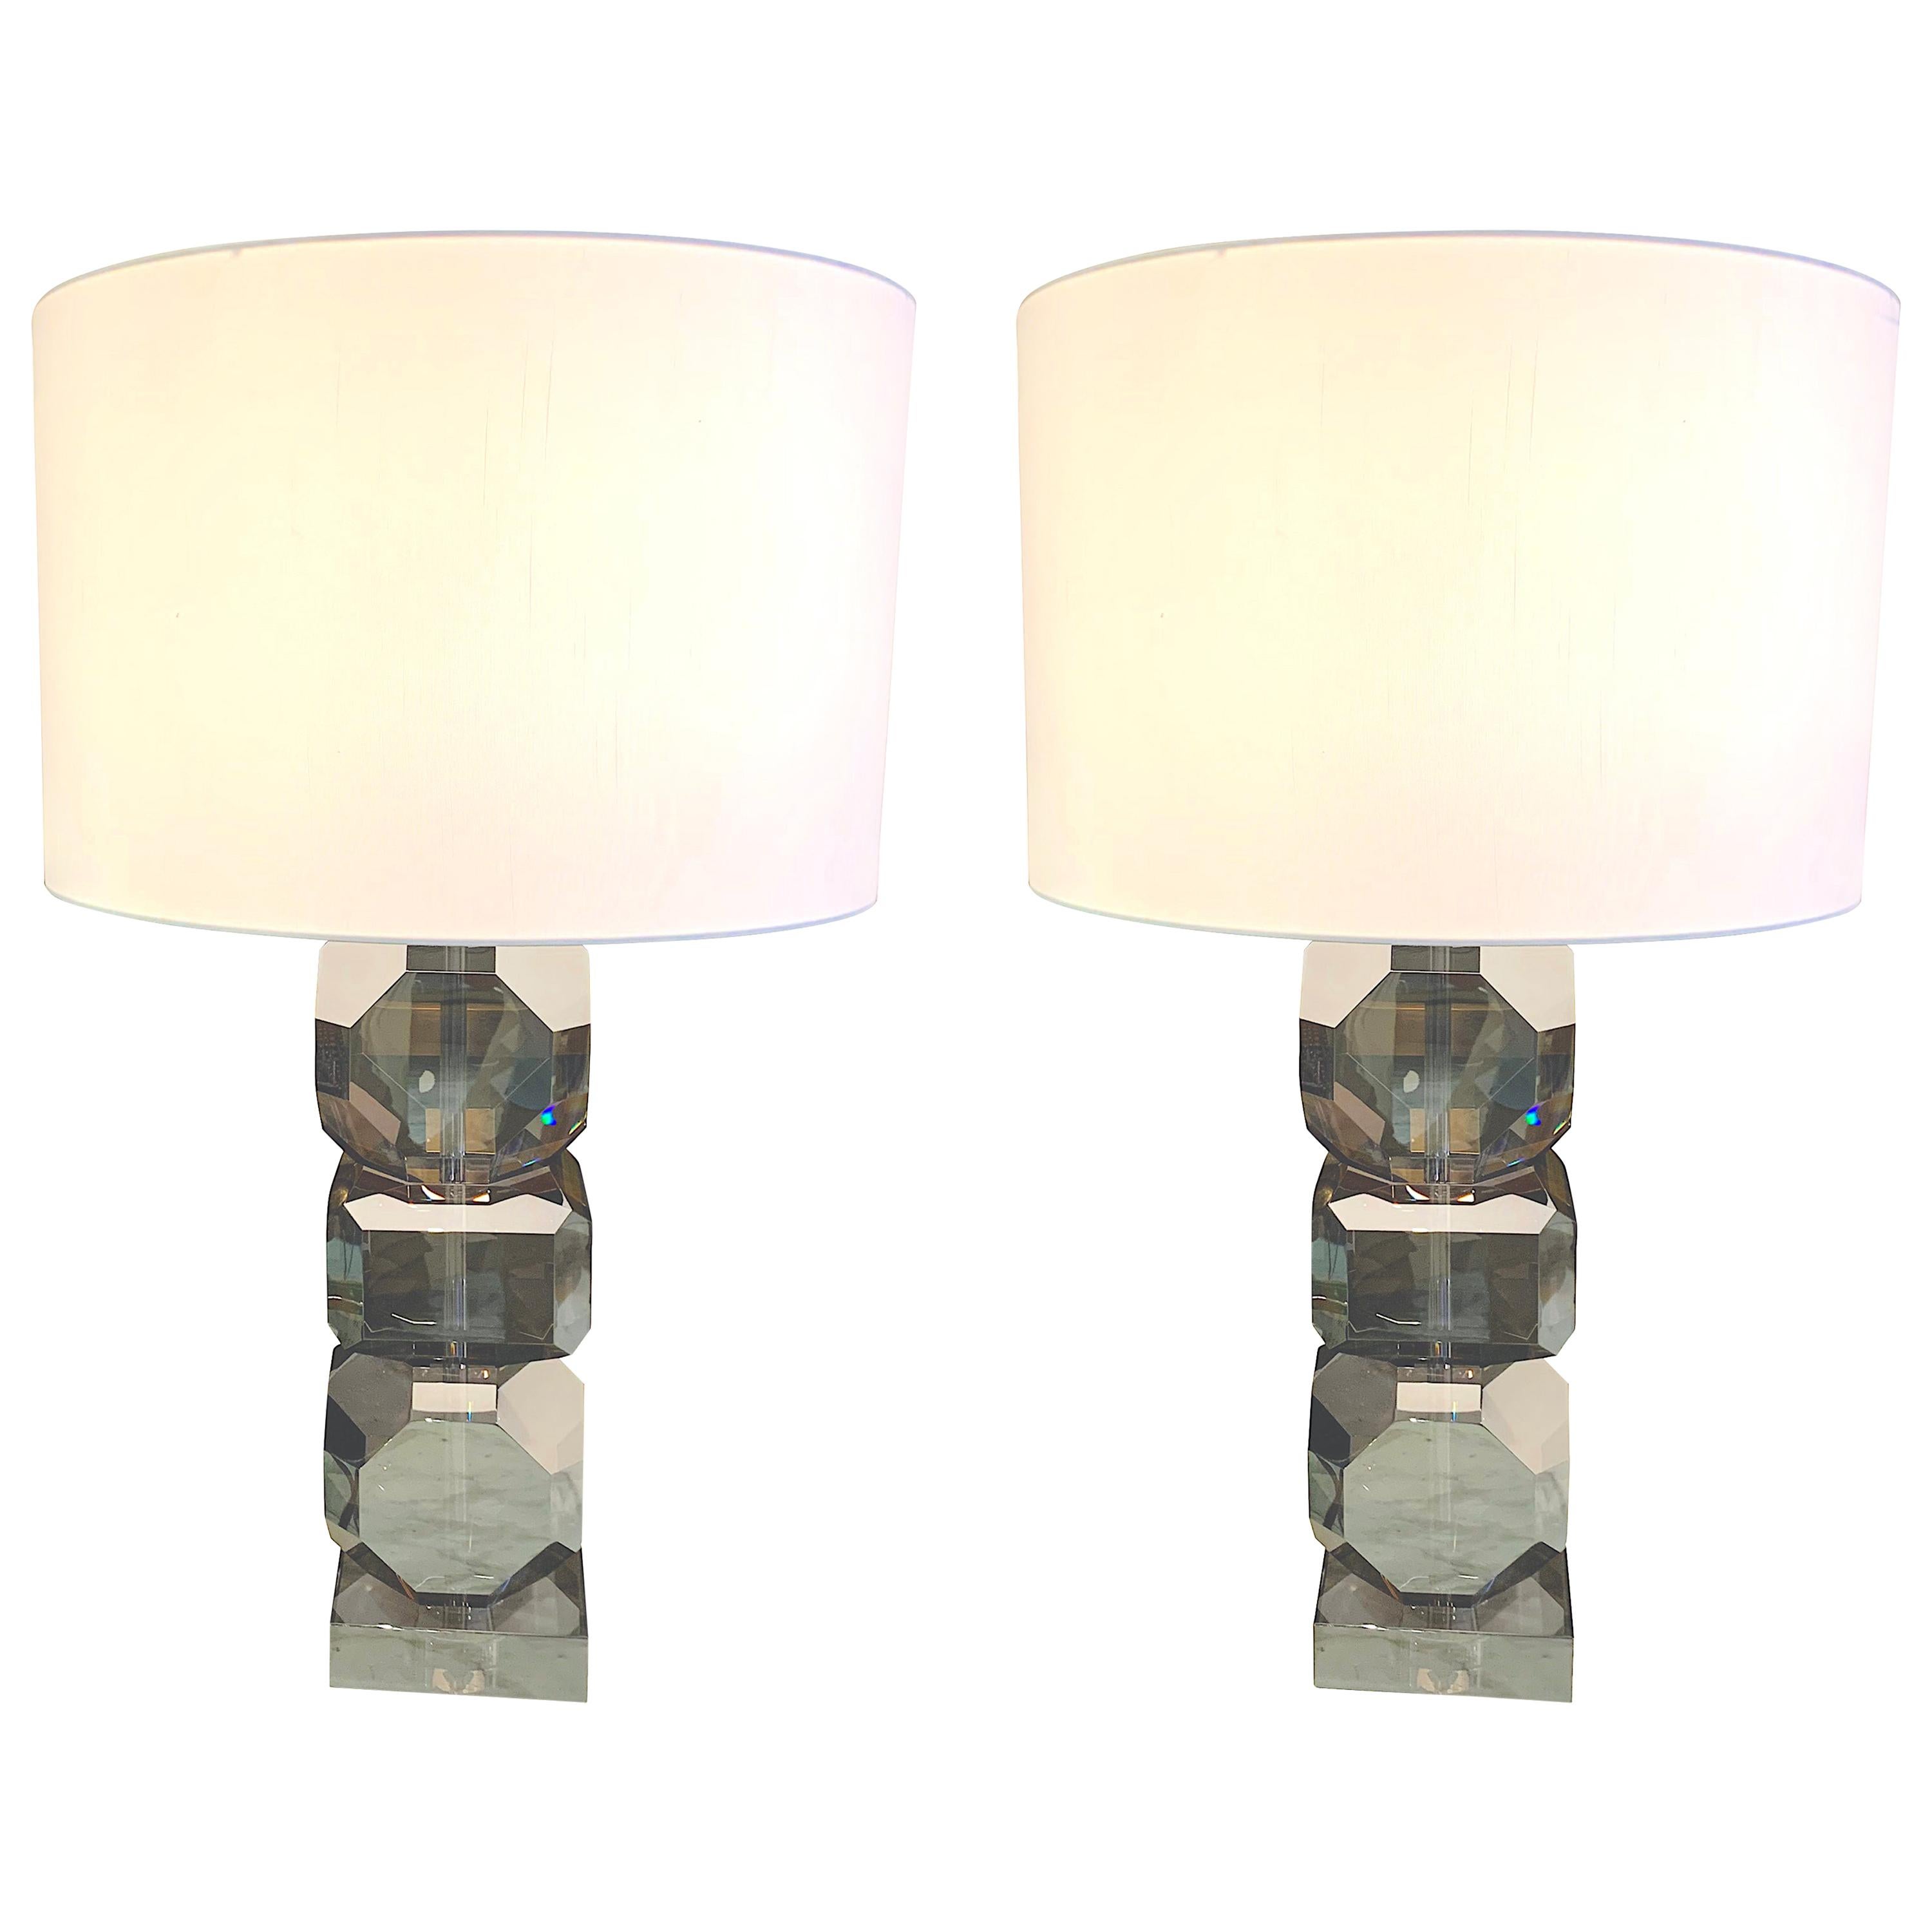 Smoked Cut Crystal Stacked Cubes Design Pair of Lamps, Dutch, Contemporary For Sale